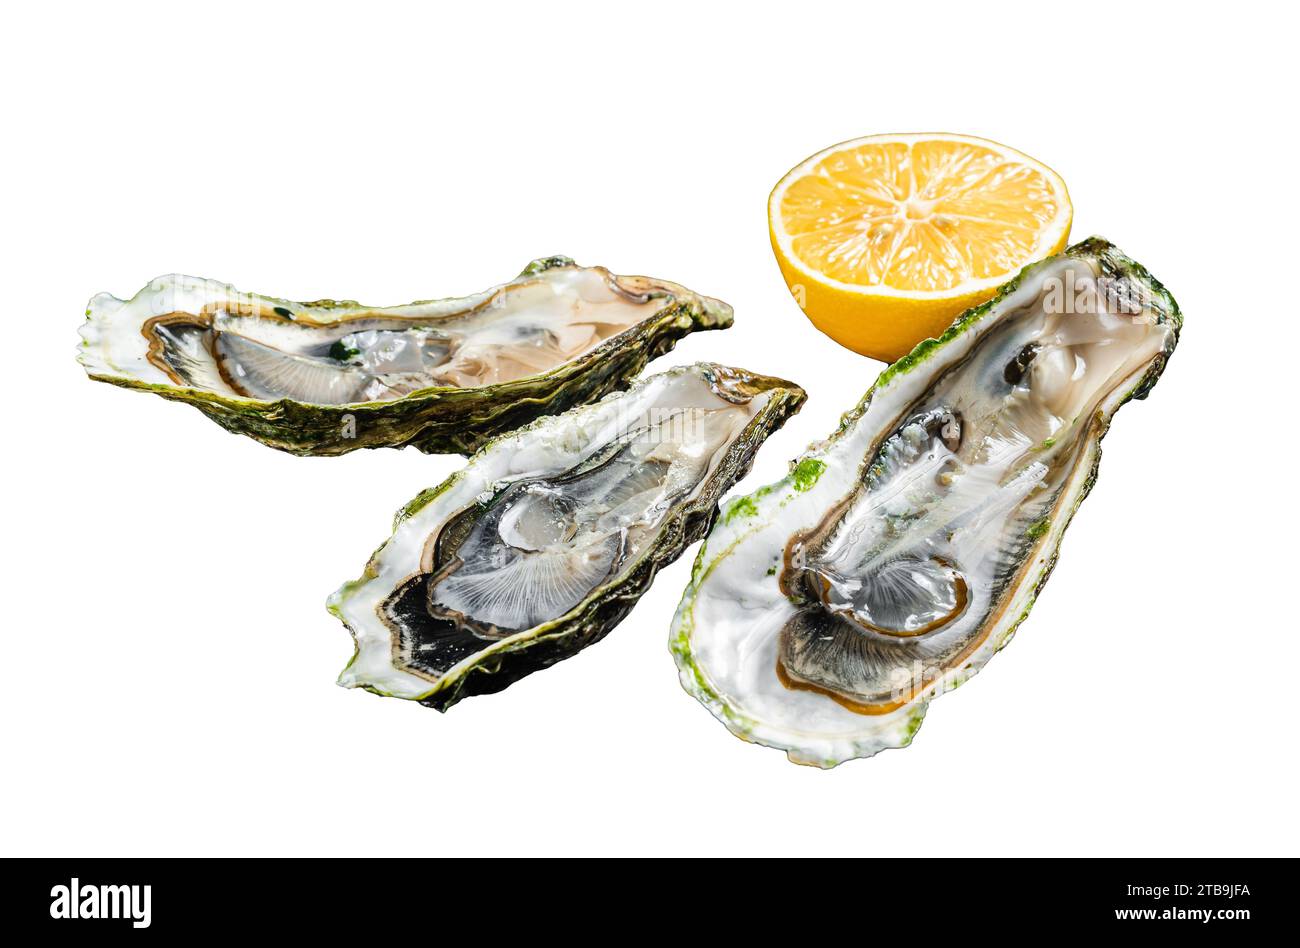 Seafood Brassiere, open Oysters with lemon. Isolated, white